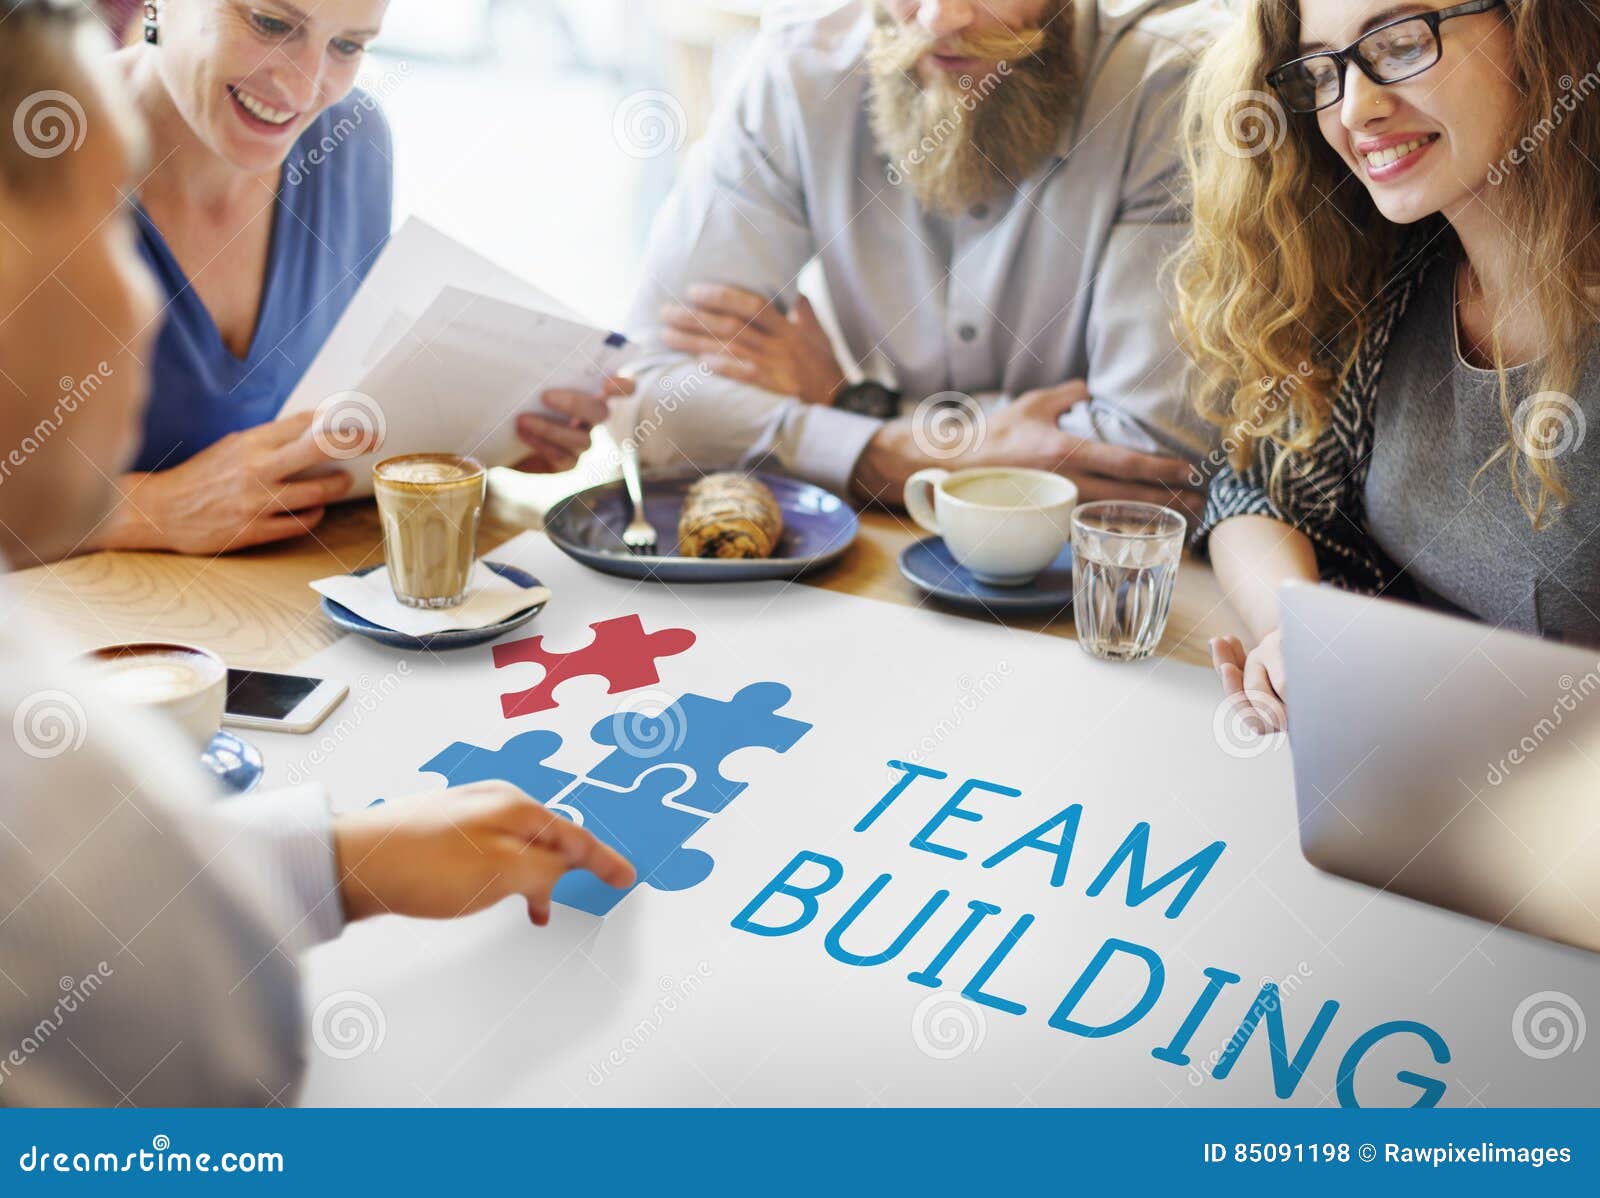 team building group work concept